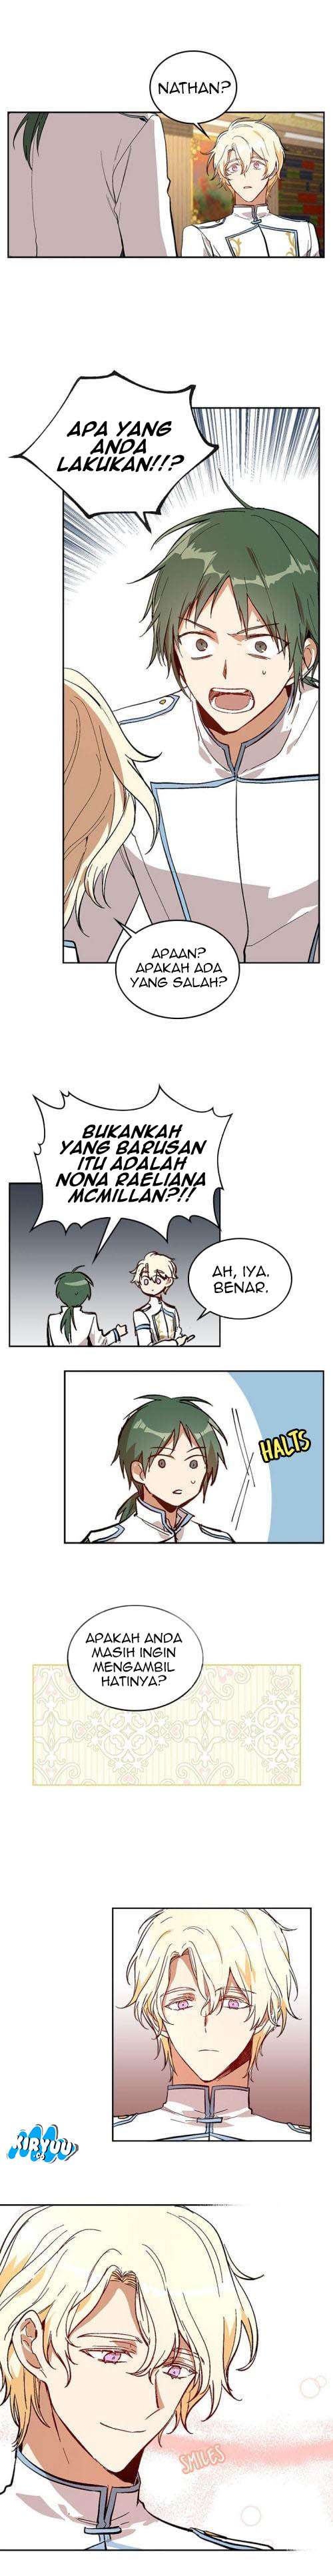 The Reason Why Raeliana Ended Up at the Duke’s Mansion Chapter 76 Bahasa Indonesia